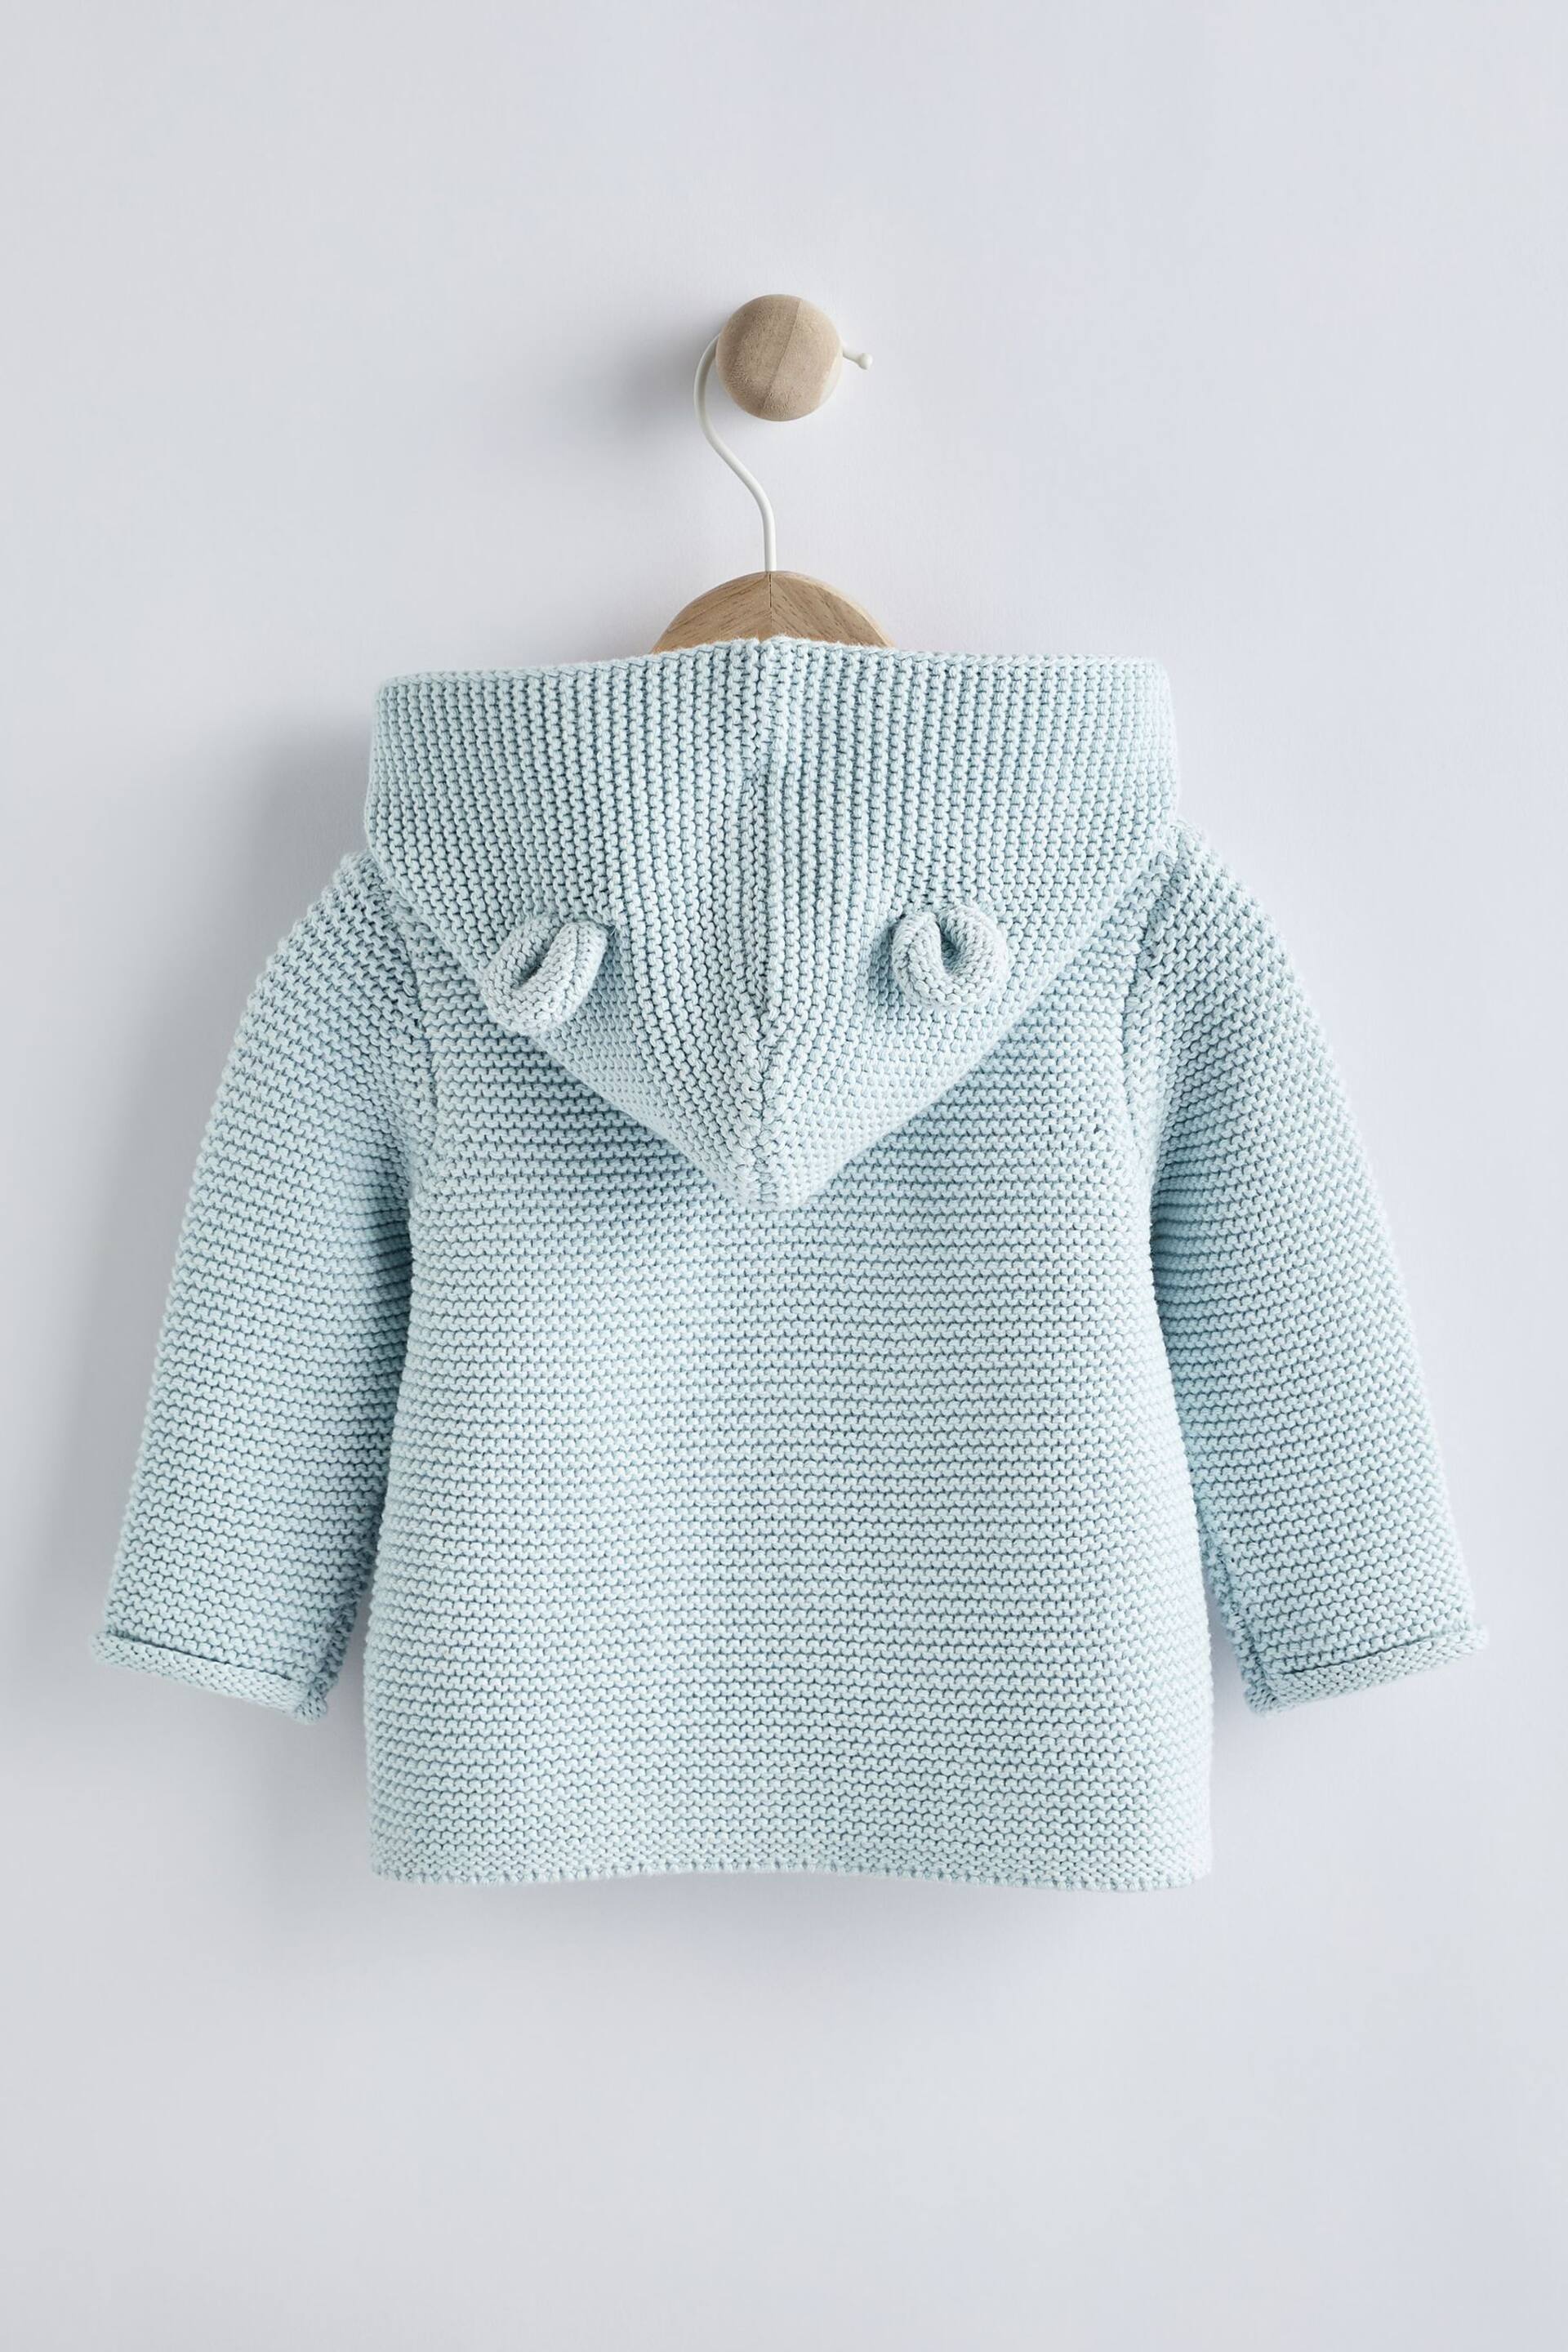 Pale Blue Baby Knitted Cardigan (0mths-3yrs) - Image 2 of 5